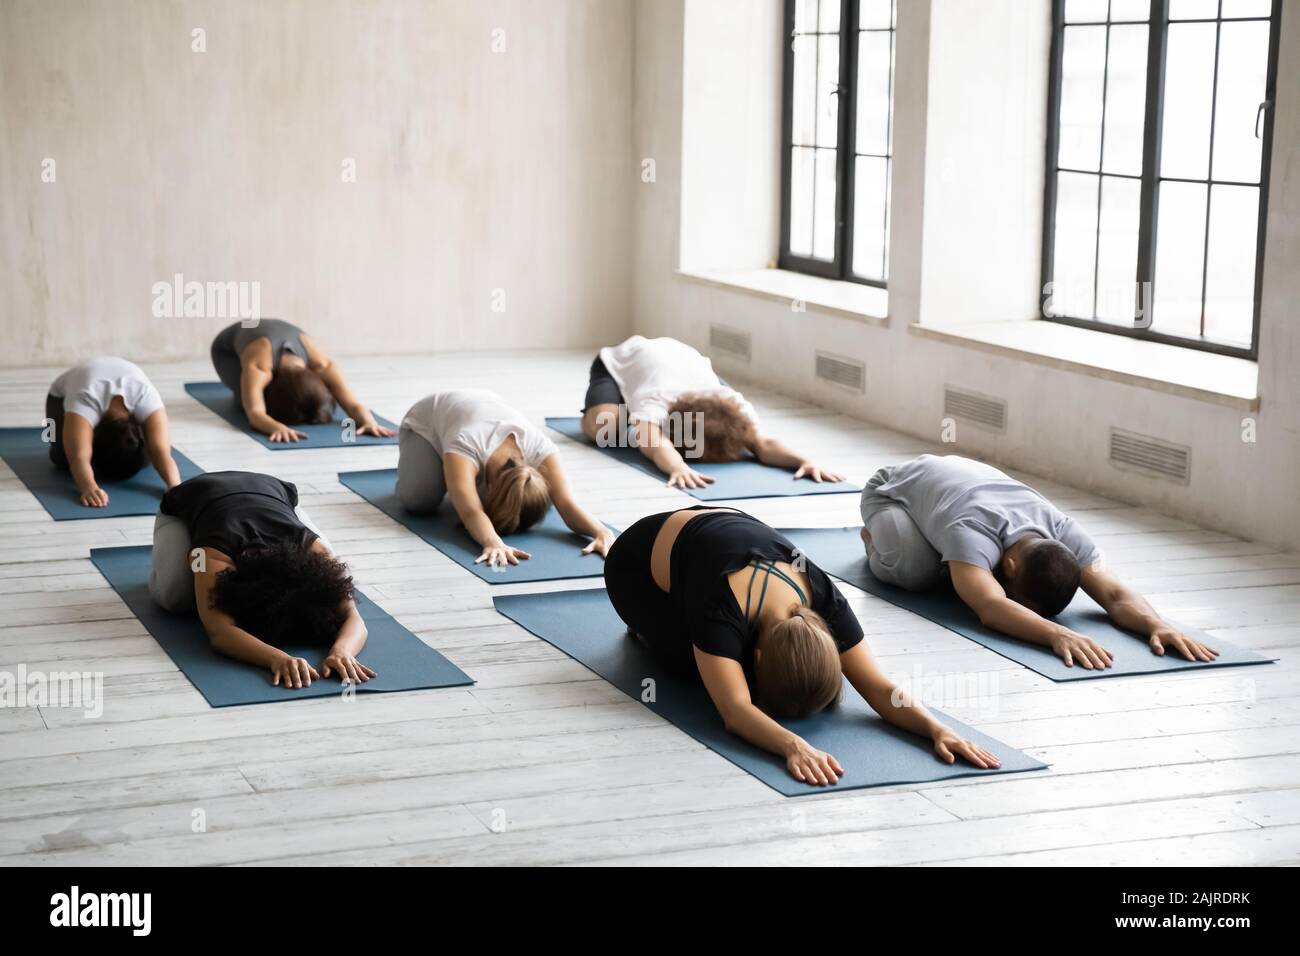 Diverse young people relaxing in Child pose, practicing yoga Stock Photo